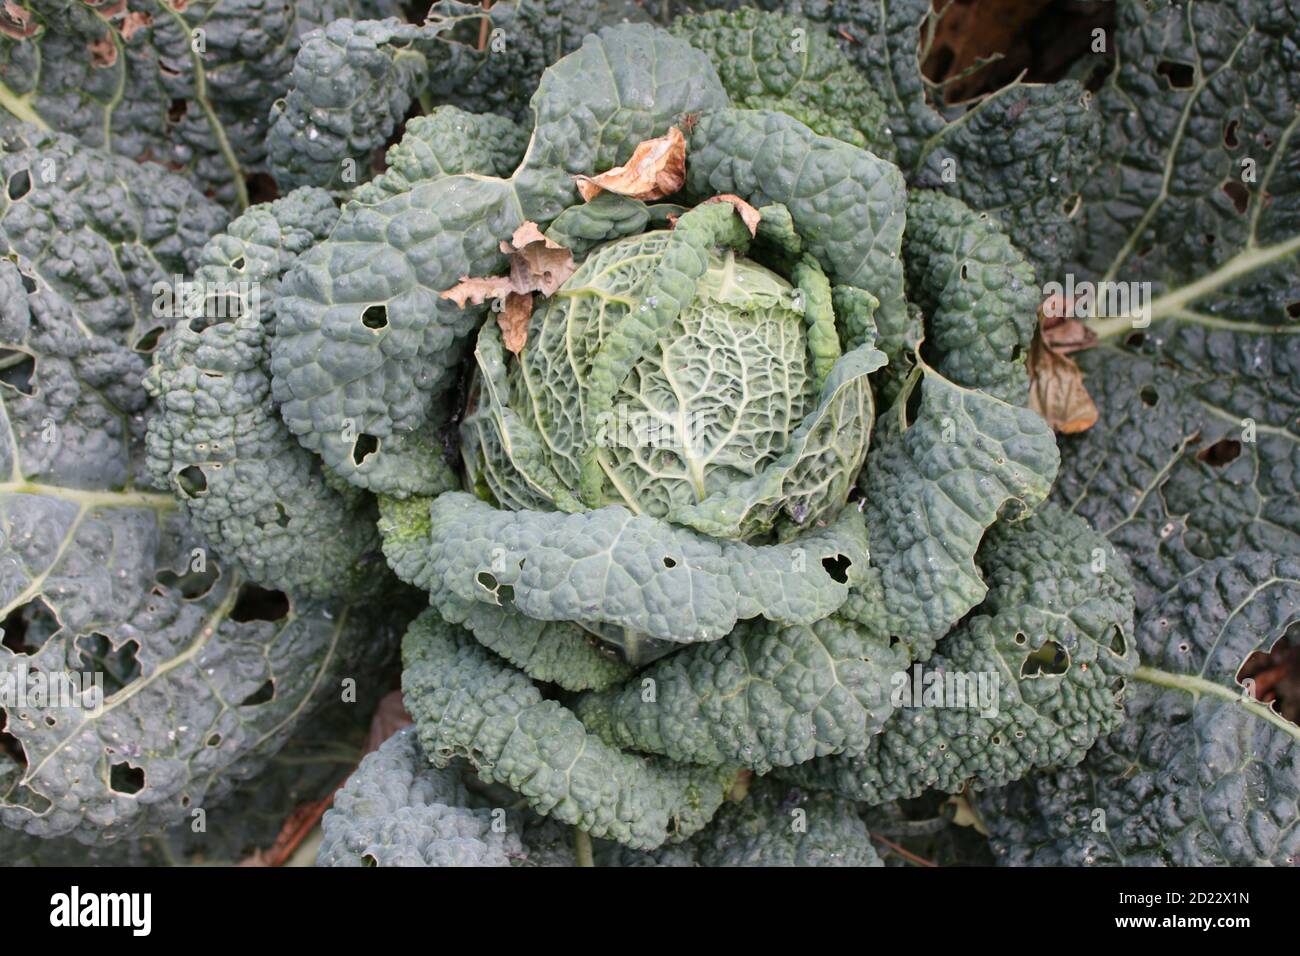 Close up of large green cabbage, showing veins curled leaves with round compact centre of the vegetable home grown in organic country English garden Stock Photo